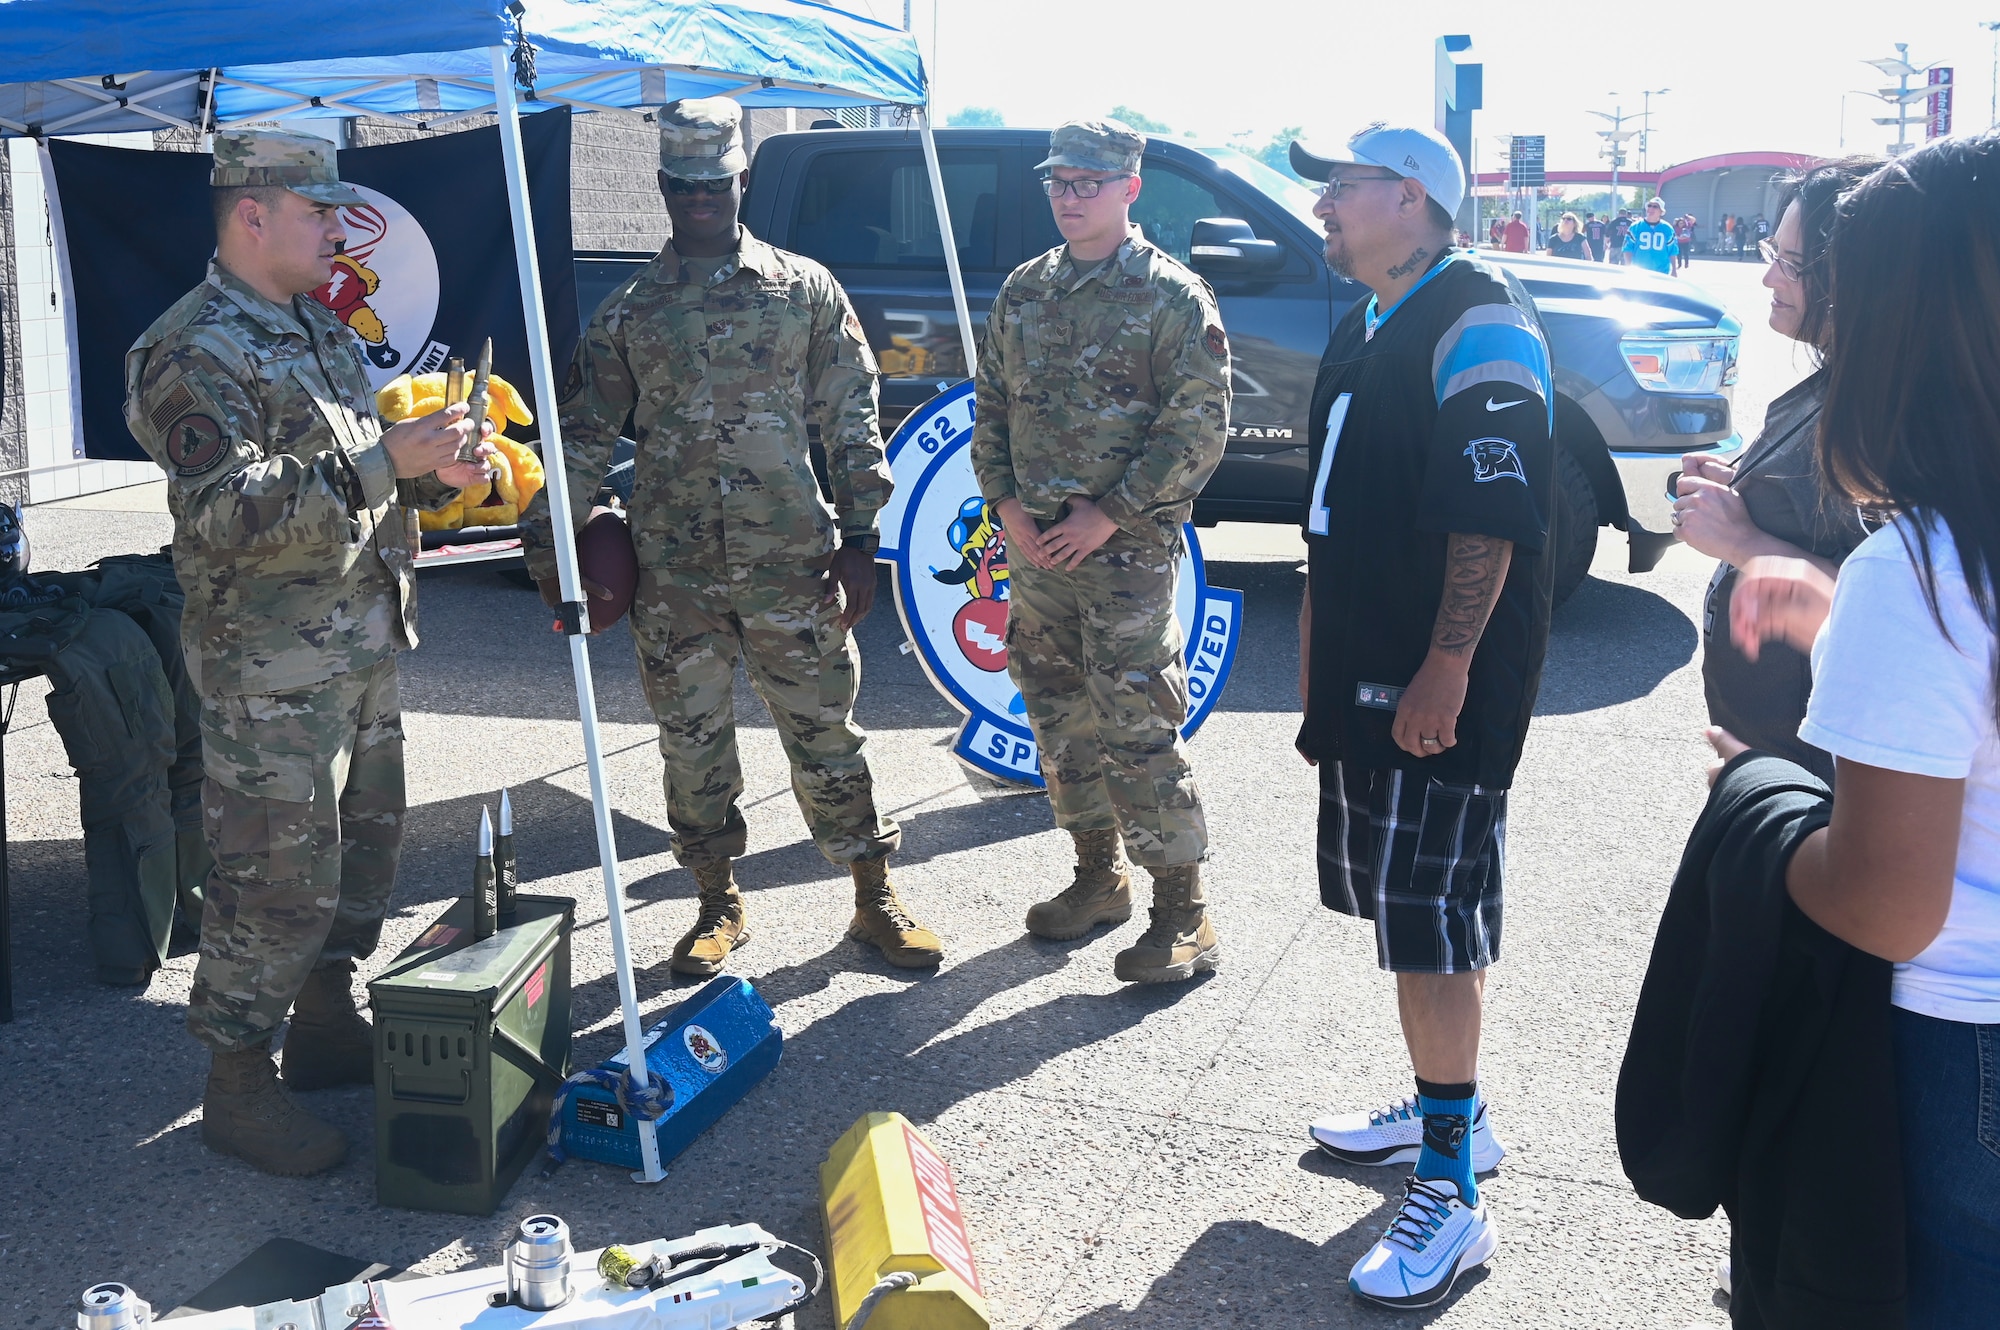 U.S. Air Force Tech. Sgt. Hector Millan, 63rd Aircraft Maintenance Unit weapons expeditor, shows different ammo rounds to football fans alongside U.S. Air Force Staff Sgt. Donte Alexander, 63rd AMU dedicated crew chief, and U.S. Air Force Staff Sgt. Jacob Cooper, 62nd AMU integrated assistant dedicated crew chief, Nov. 14, 2021, at the State Farm Stadium, Glendale, Arizona.